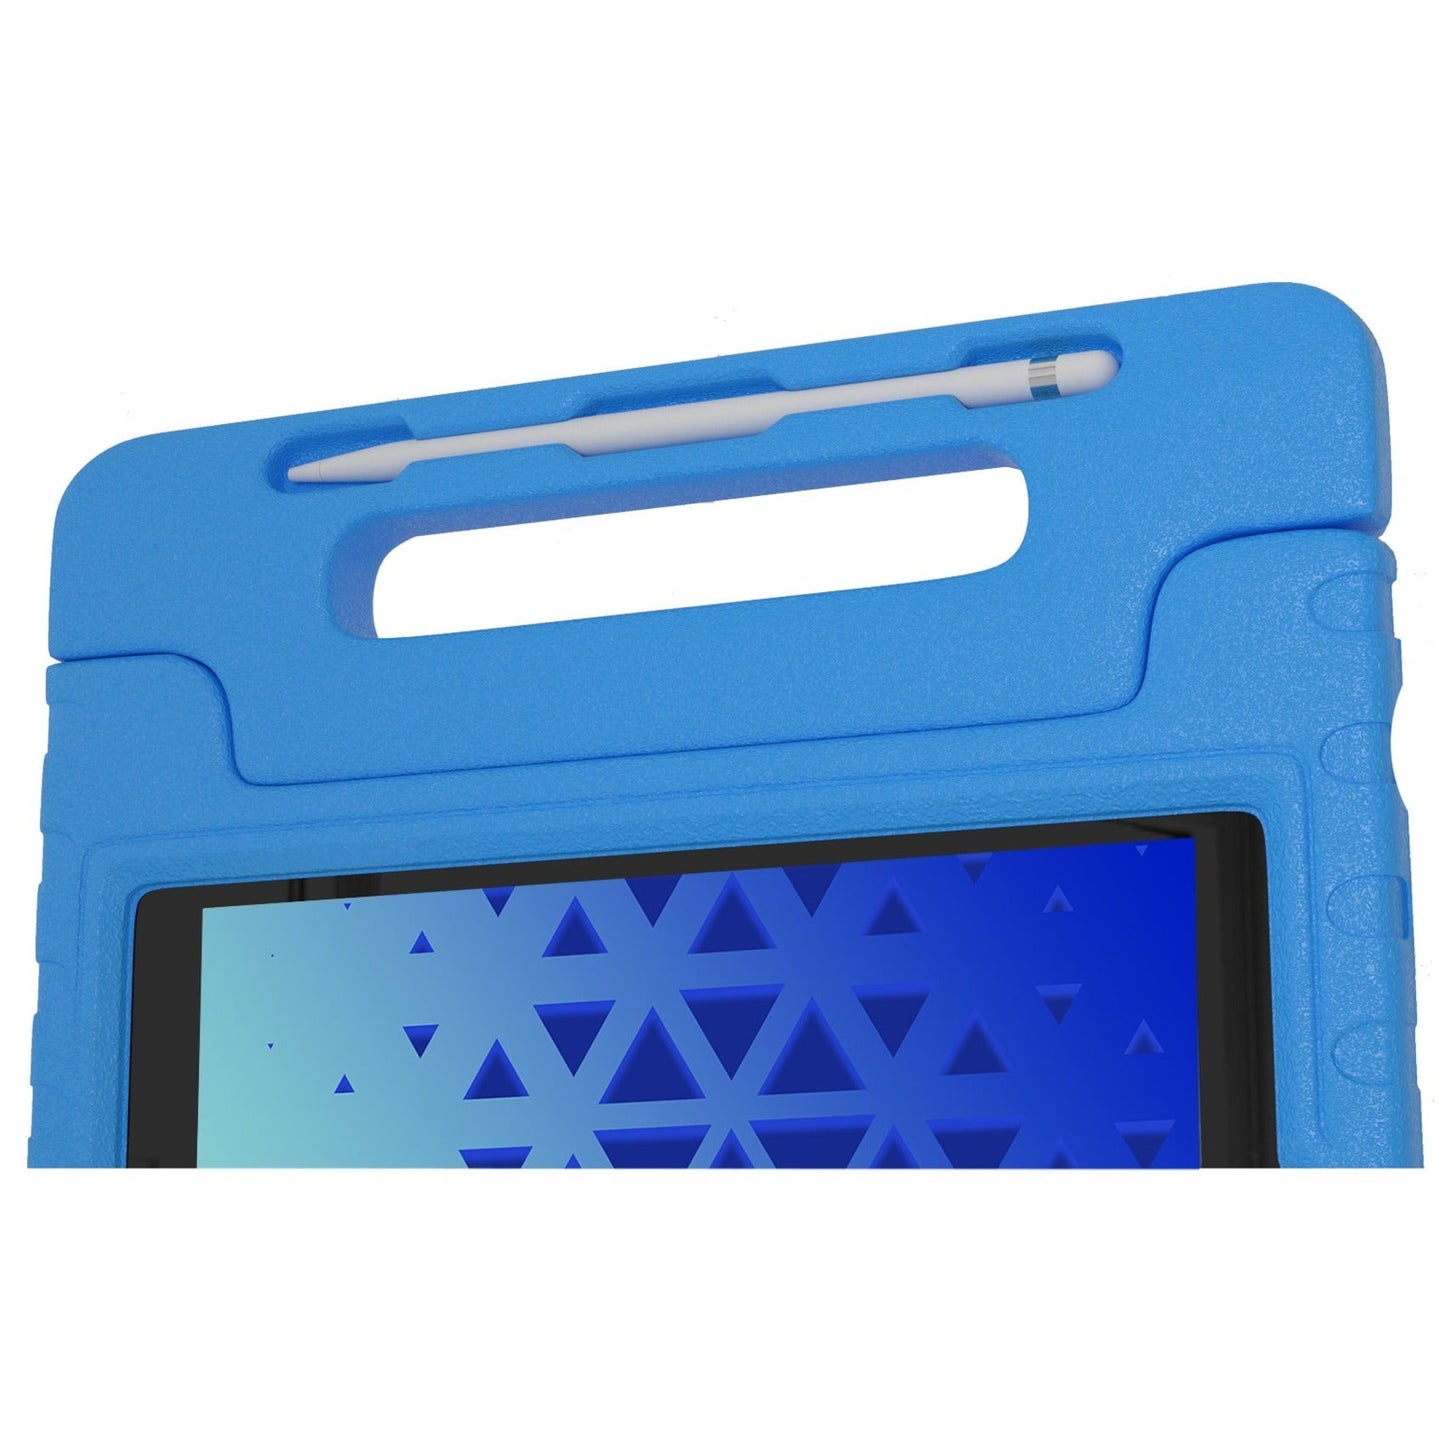 MAXCases Shieldy-K Rugged Carrying Case for 6" Apple iPad mini (6th Generation) Tablet - Blue